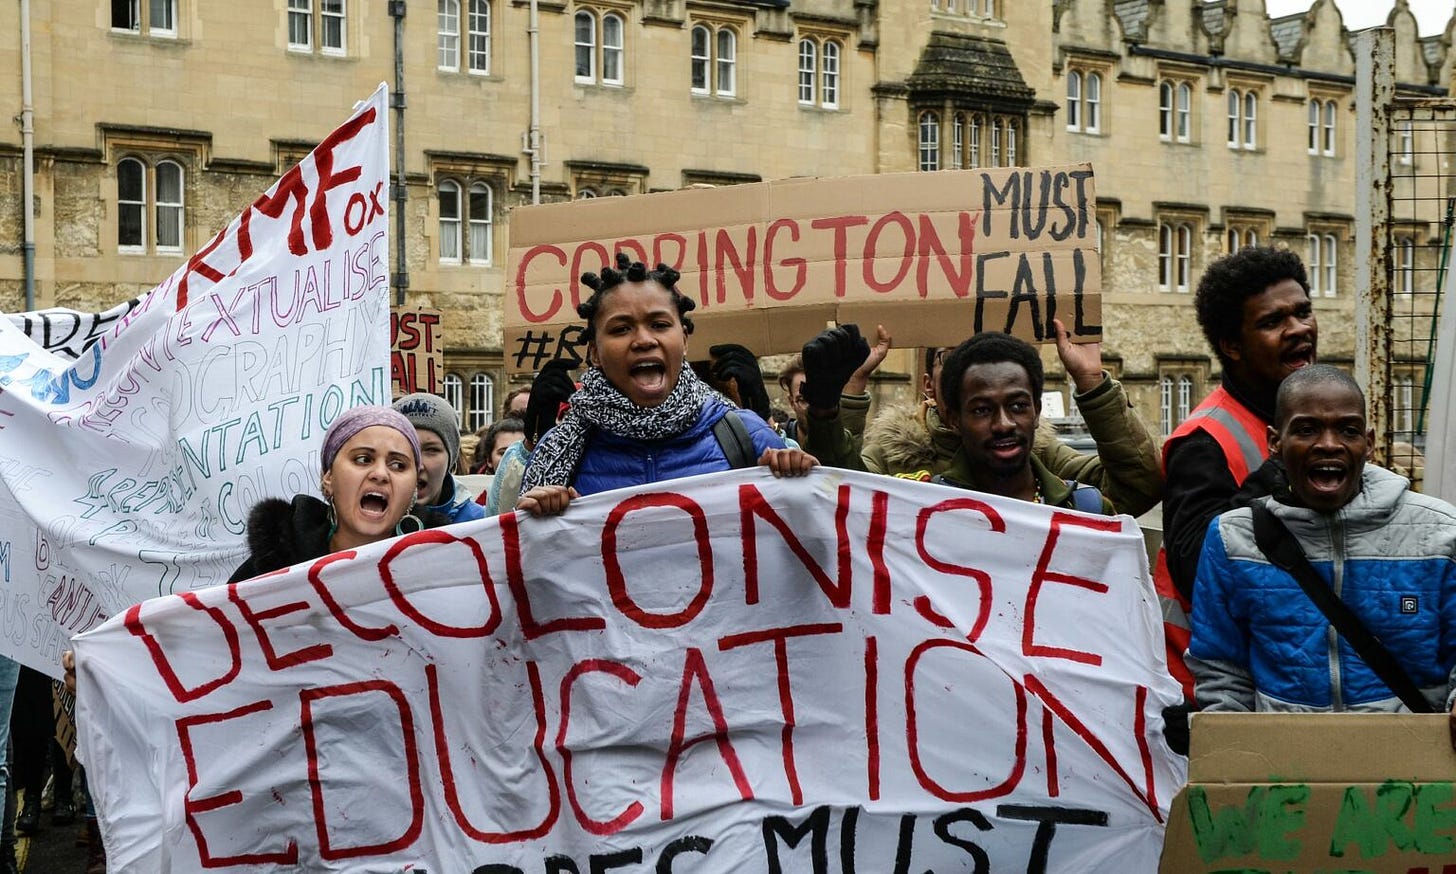 Students demonstrate outside Oxford University's Oriel College for the removal of the Cecil Rhodes statue on March 9, 2016.